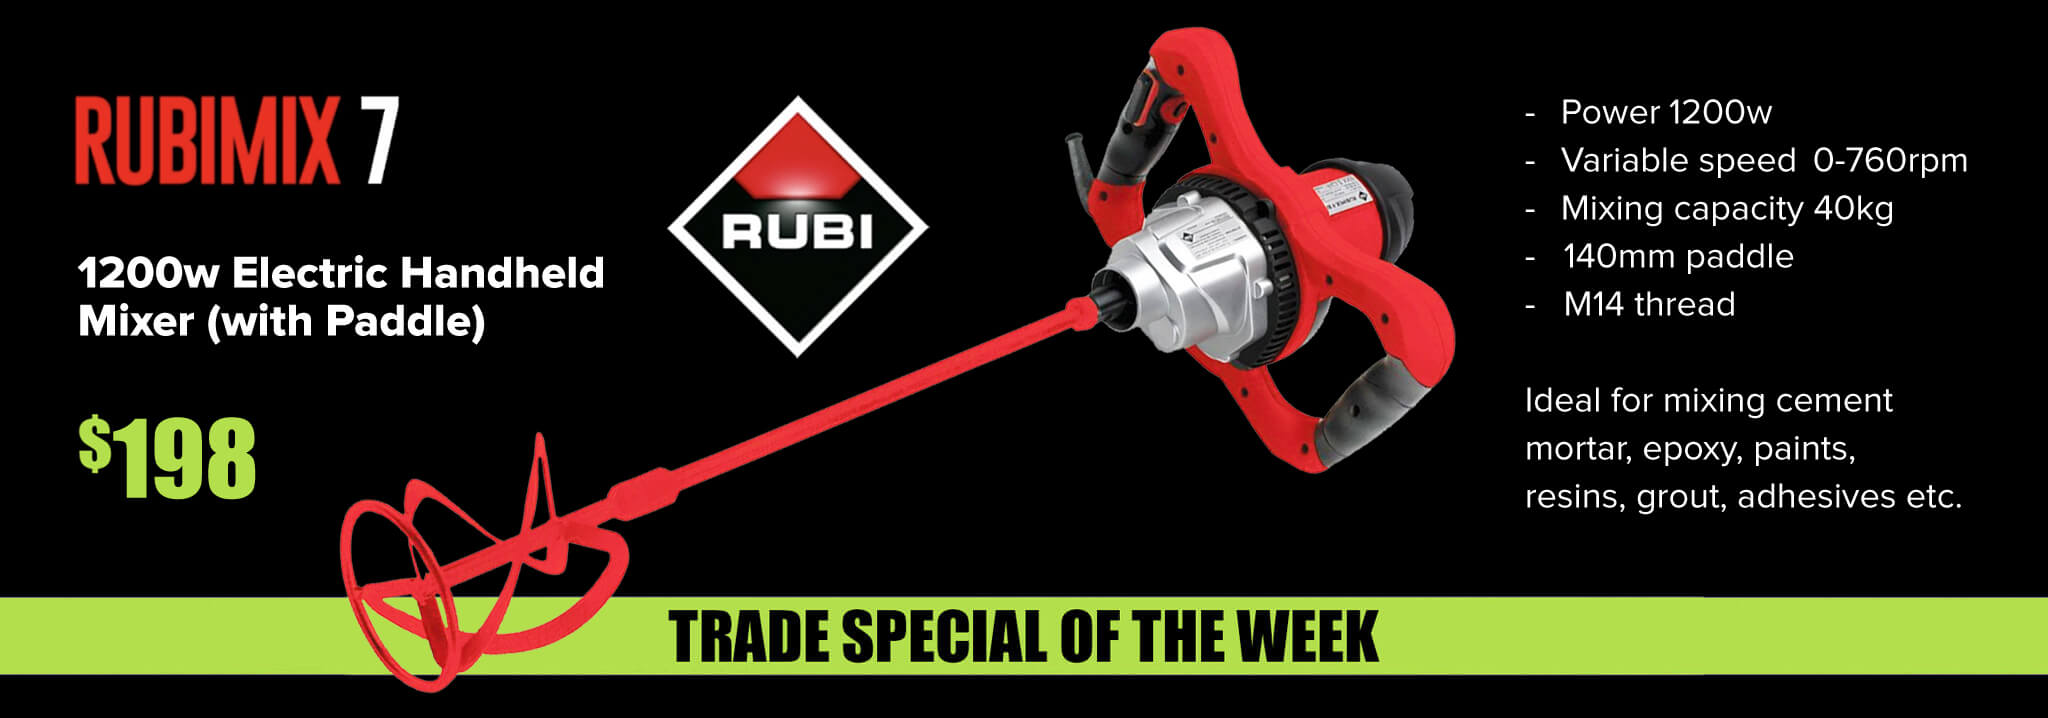 Rubimix 7 Trade Special of the Week